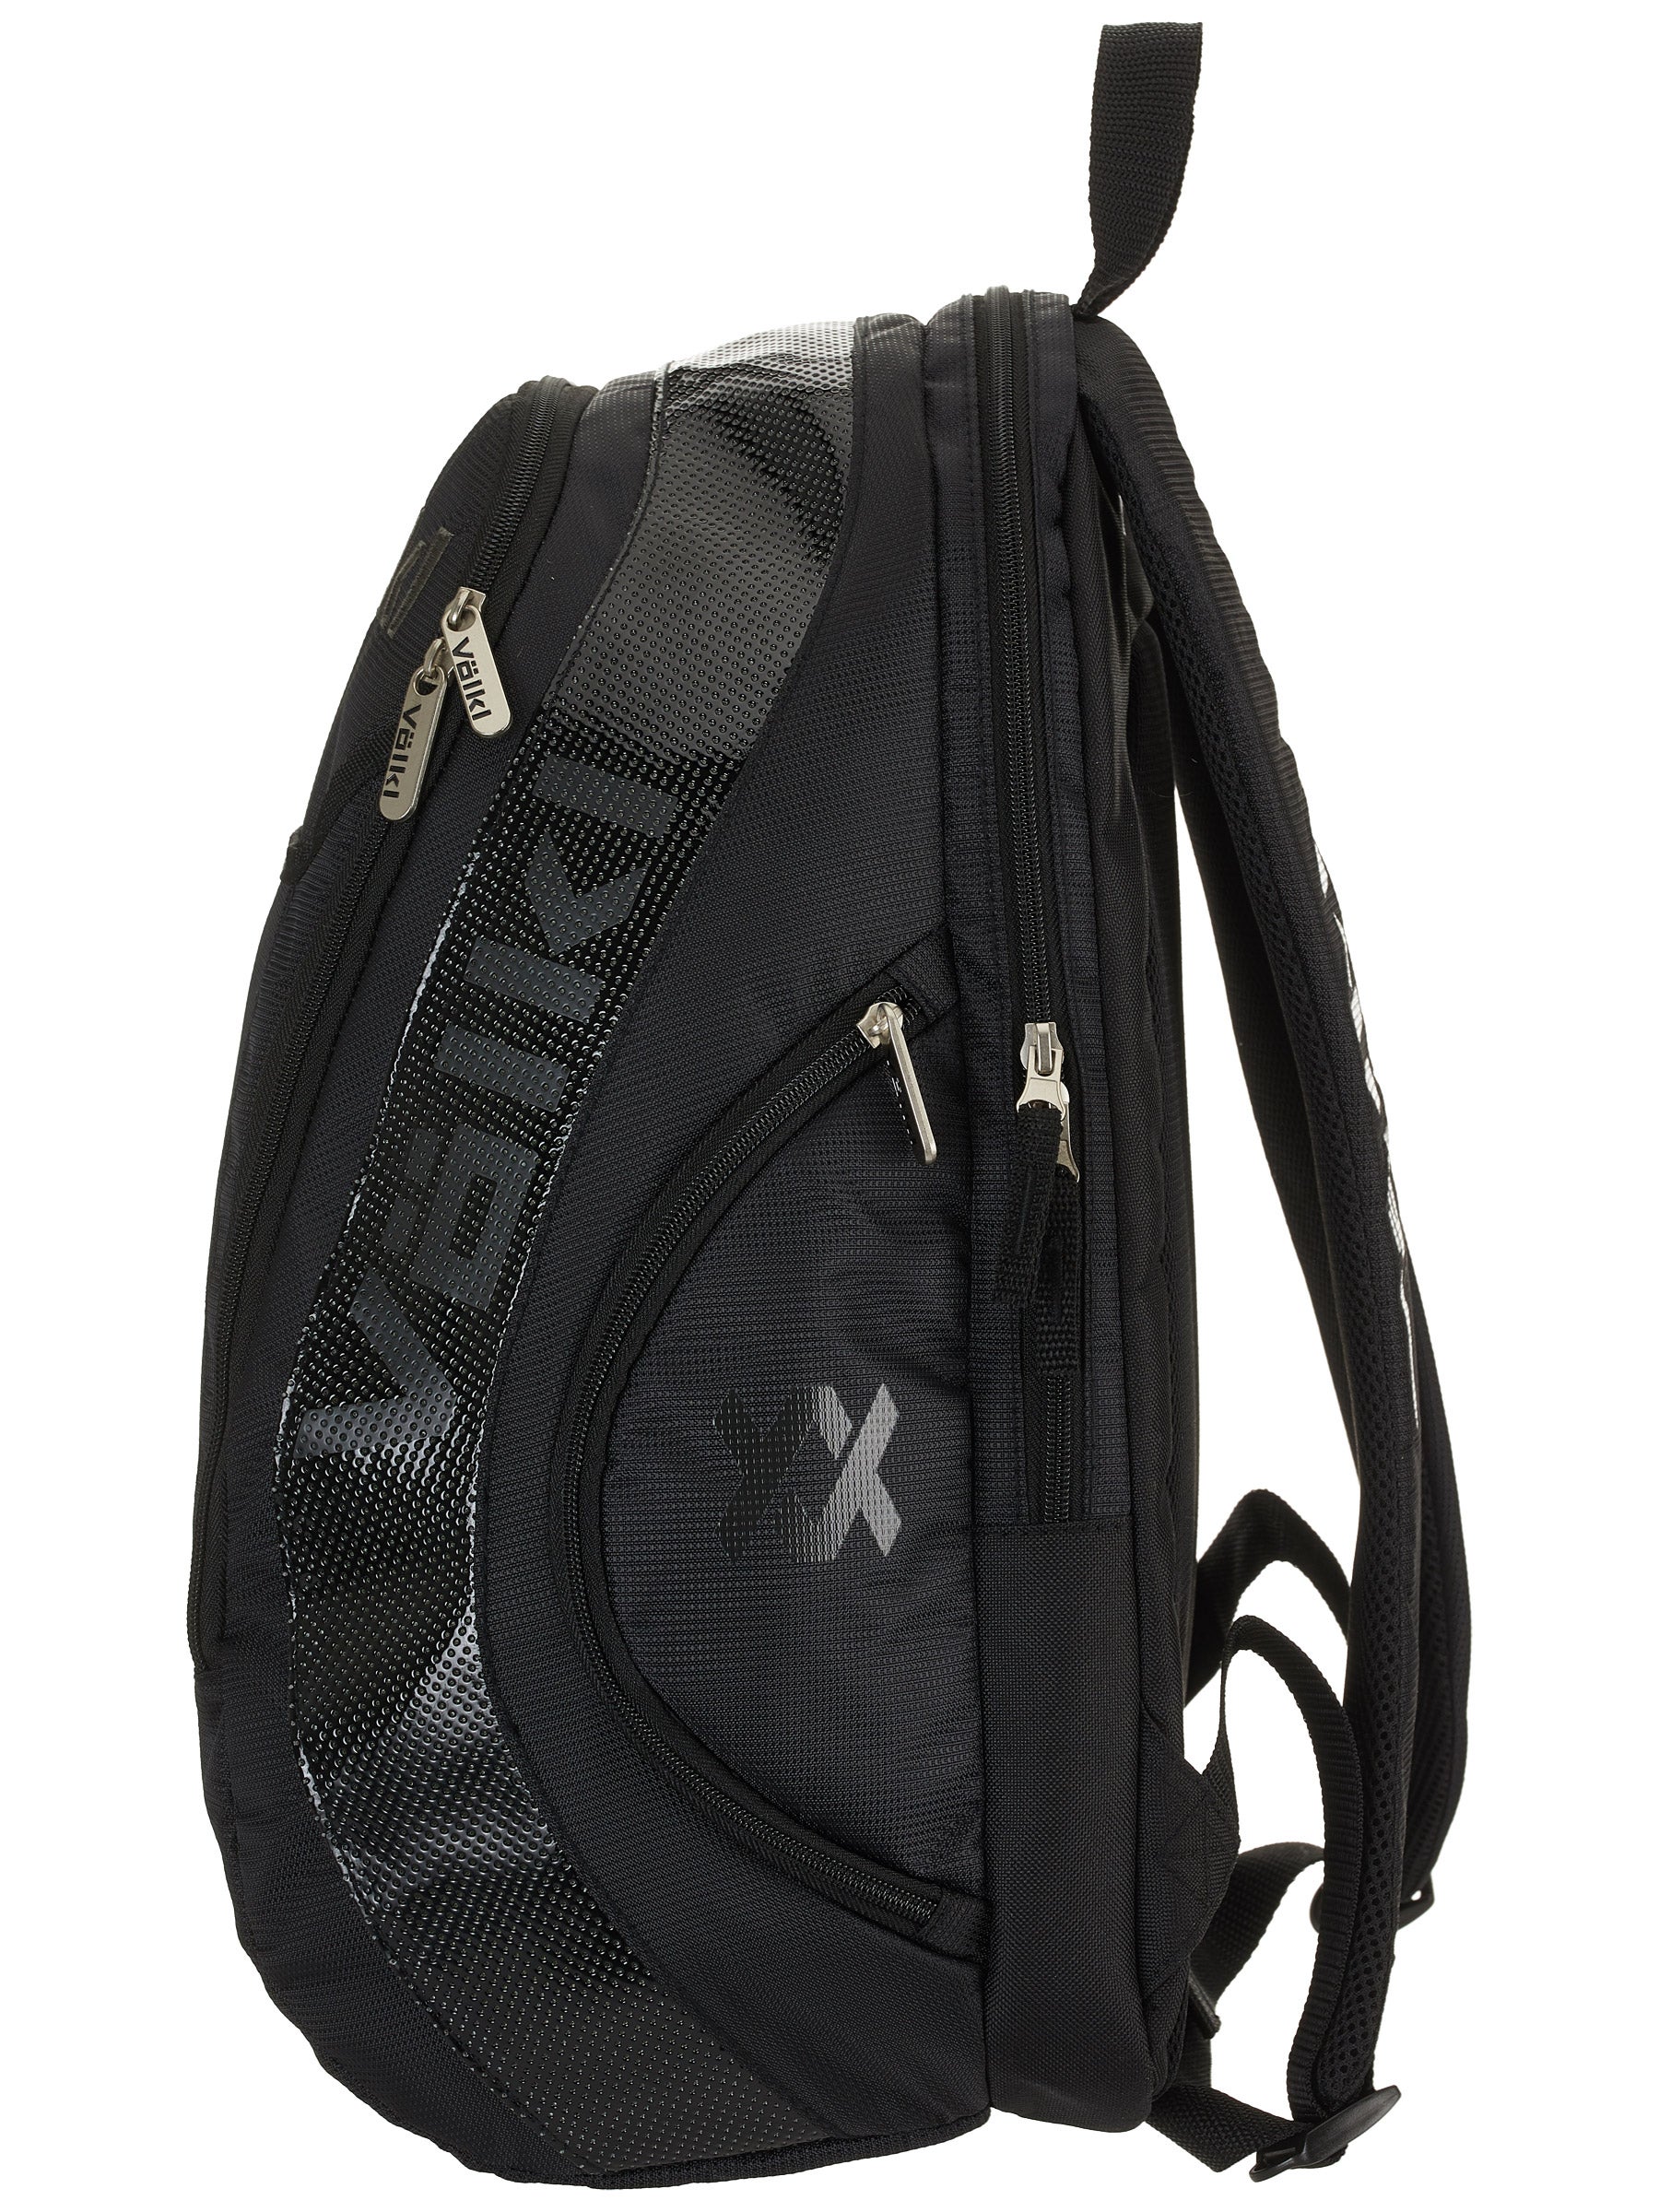 Details about   VOLKL Tennis Racquet Tour Bag with Double sided Compartments and Backpack straps 